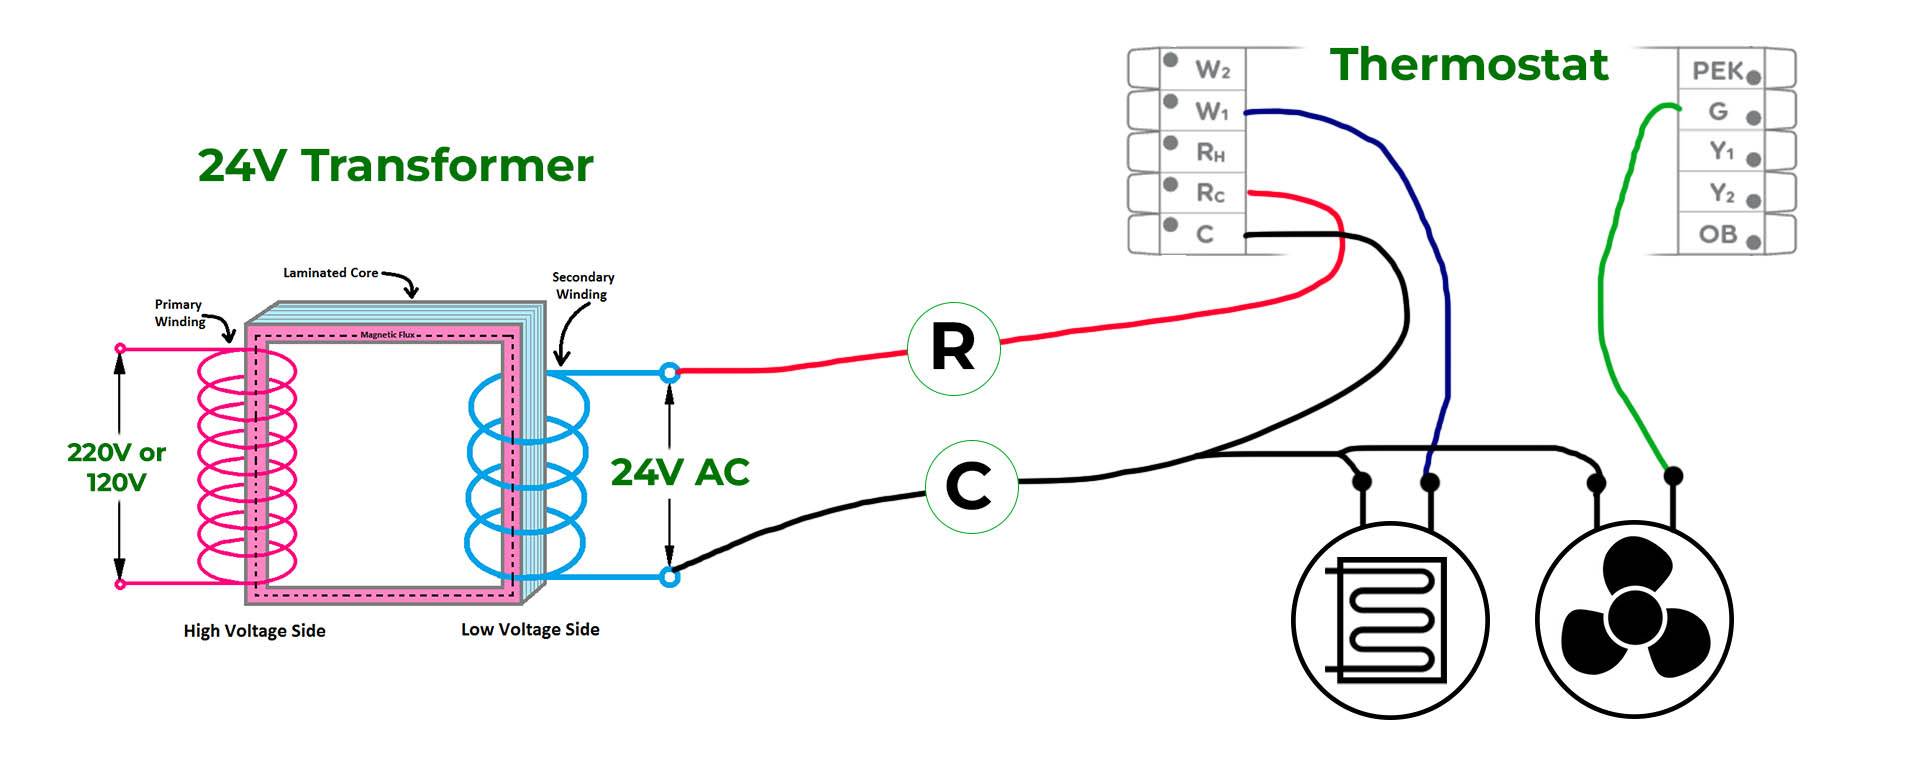 How to Wire a 24v Transformer to a Thermostat